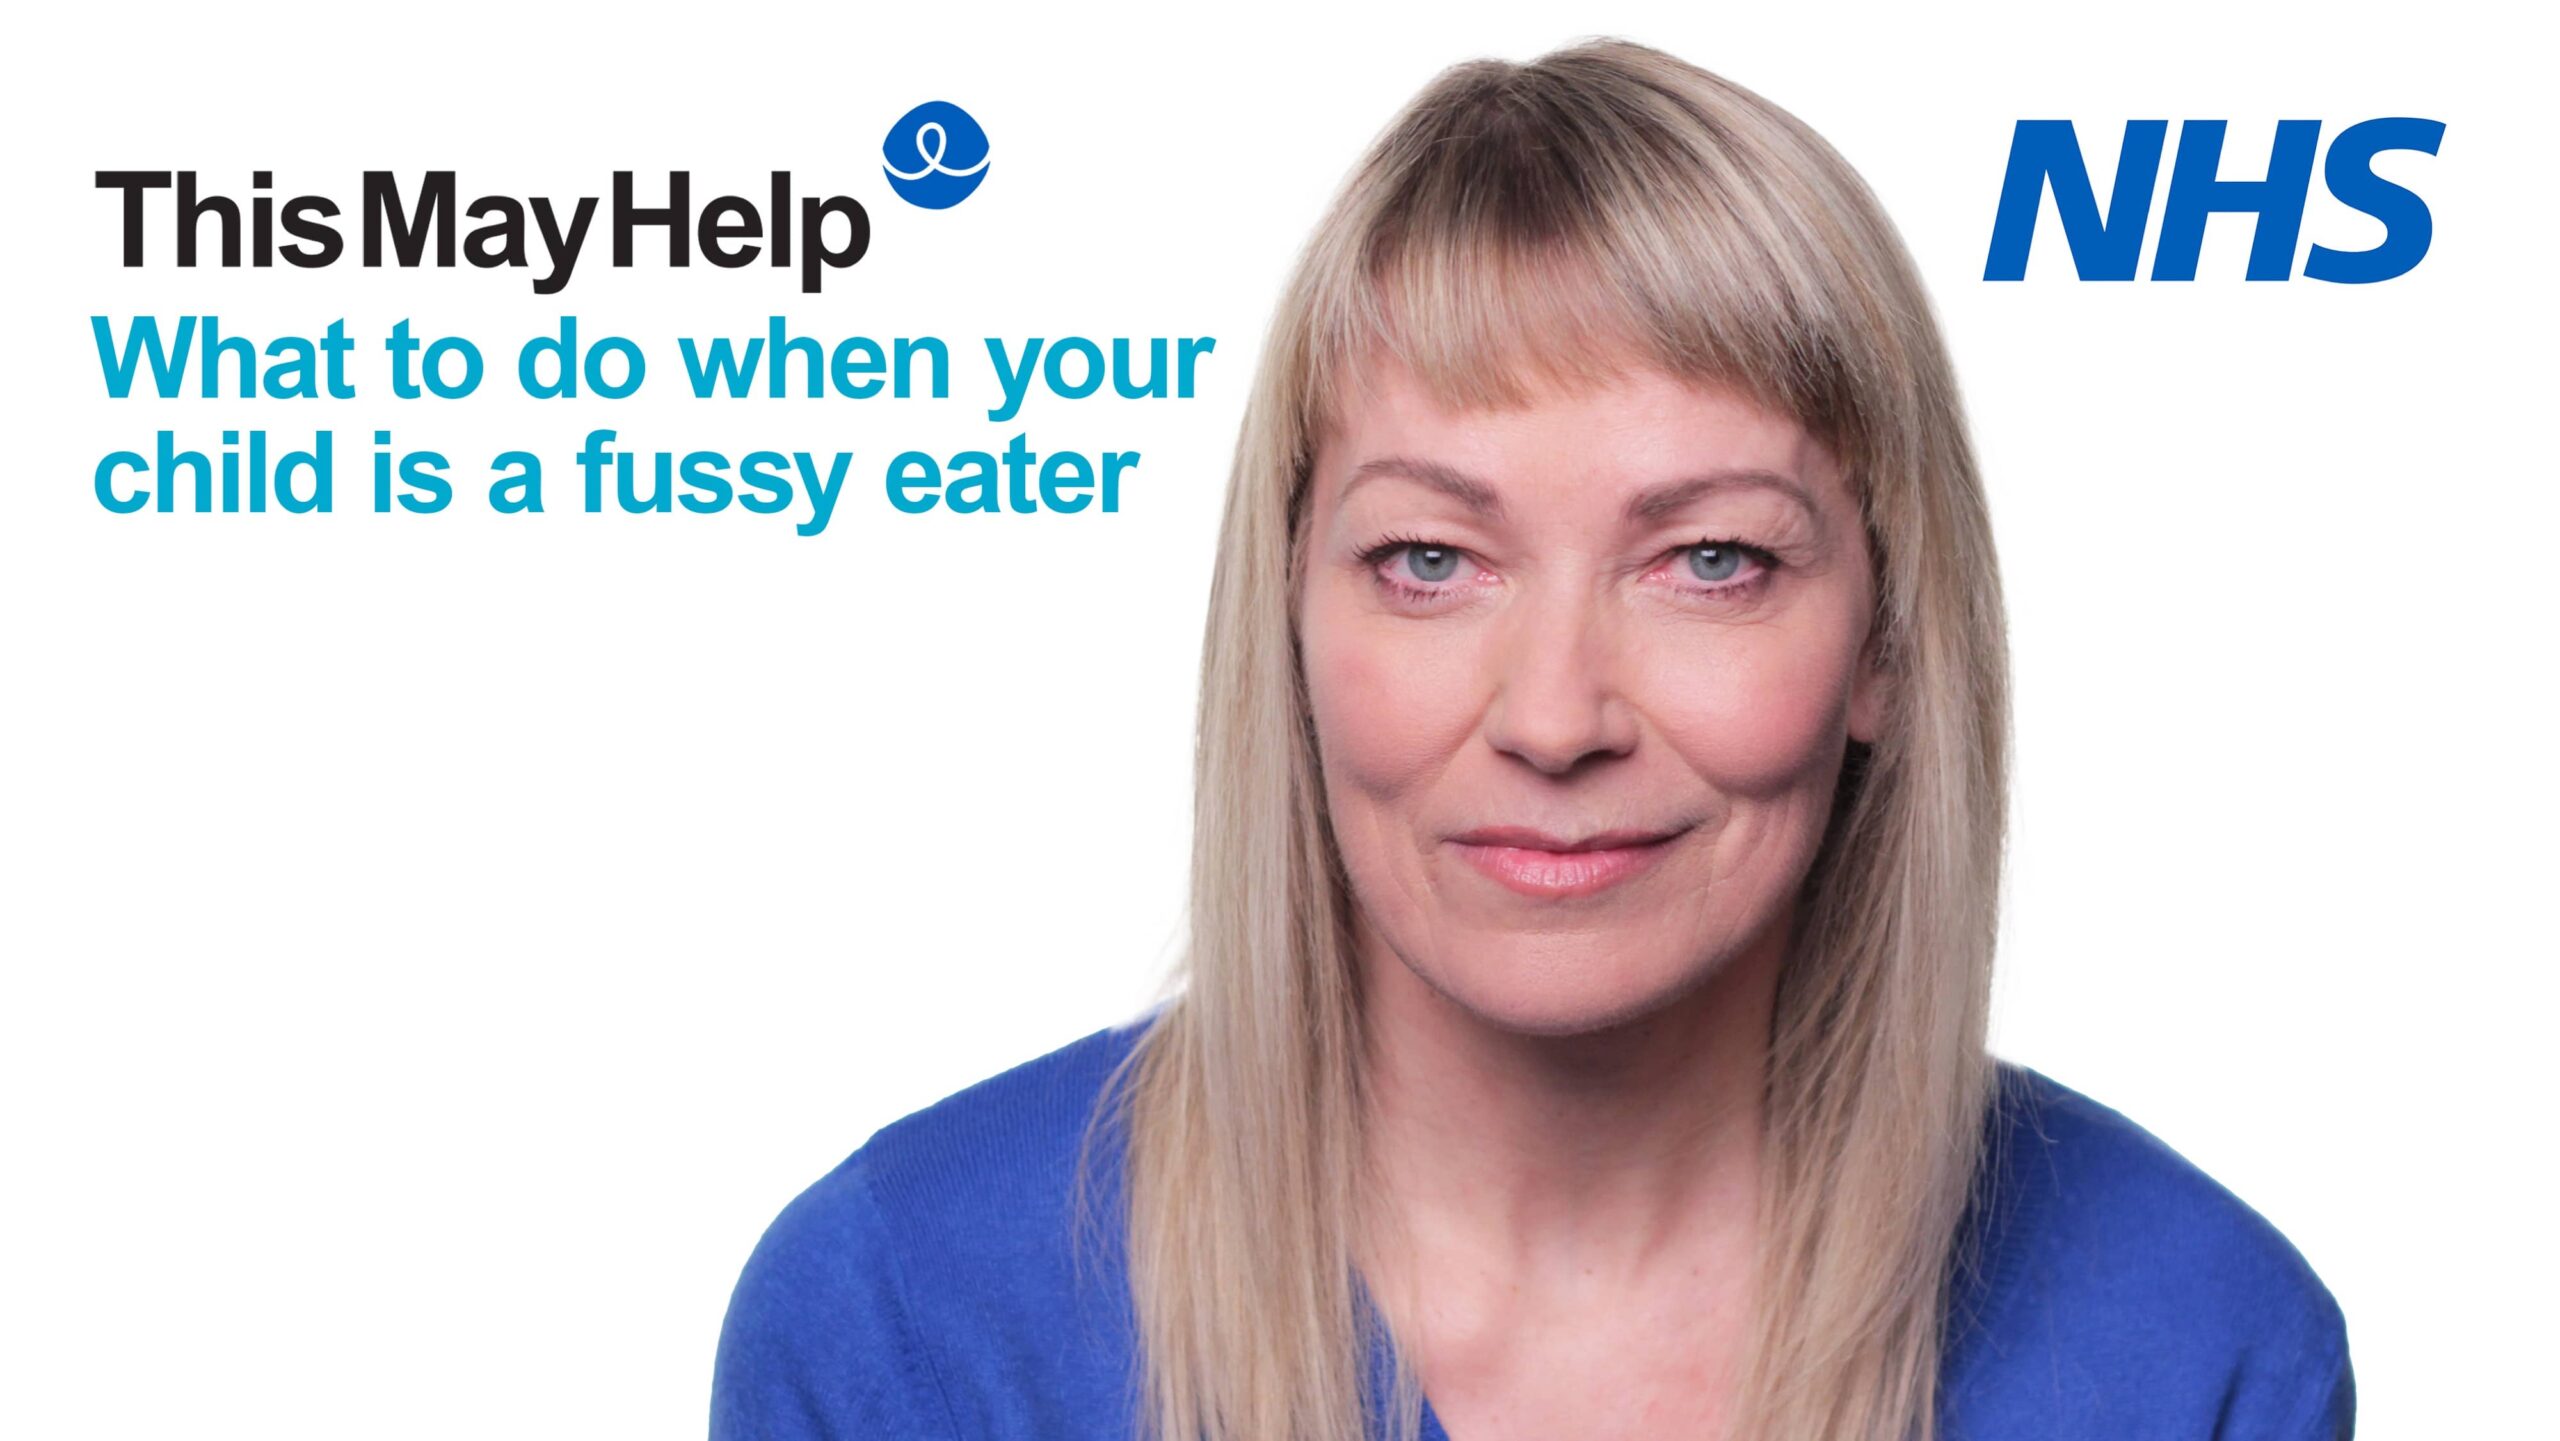 How to deal with fussy eating